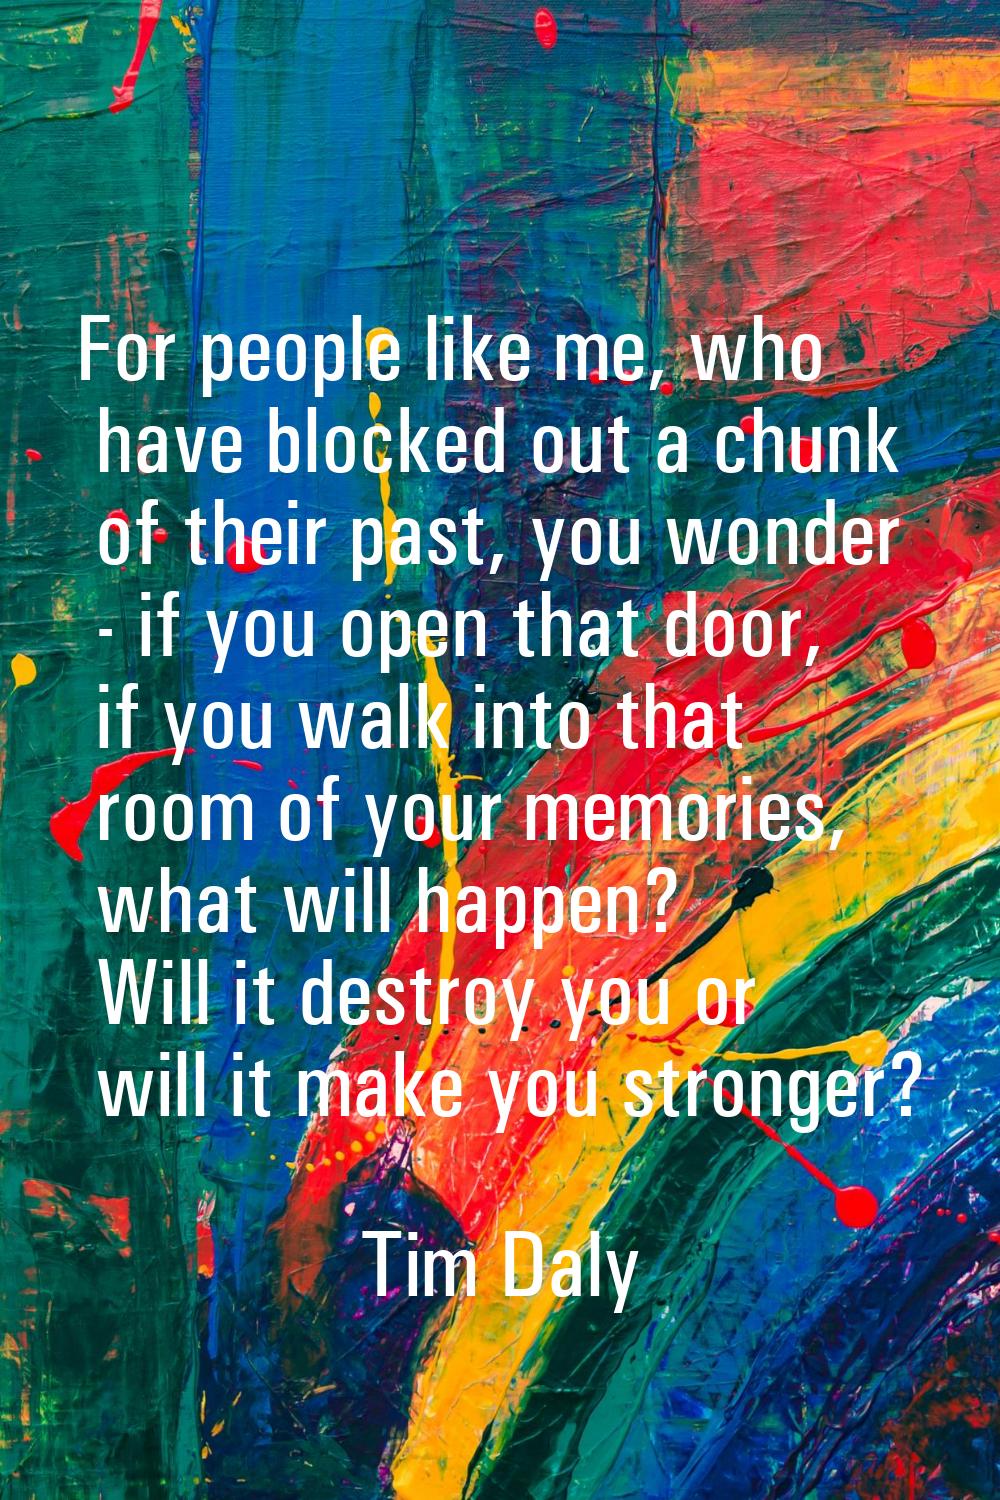 For people like me, who have blocked out a chunk of their past, you wonder - if you open that door,